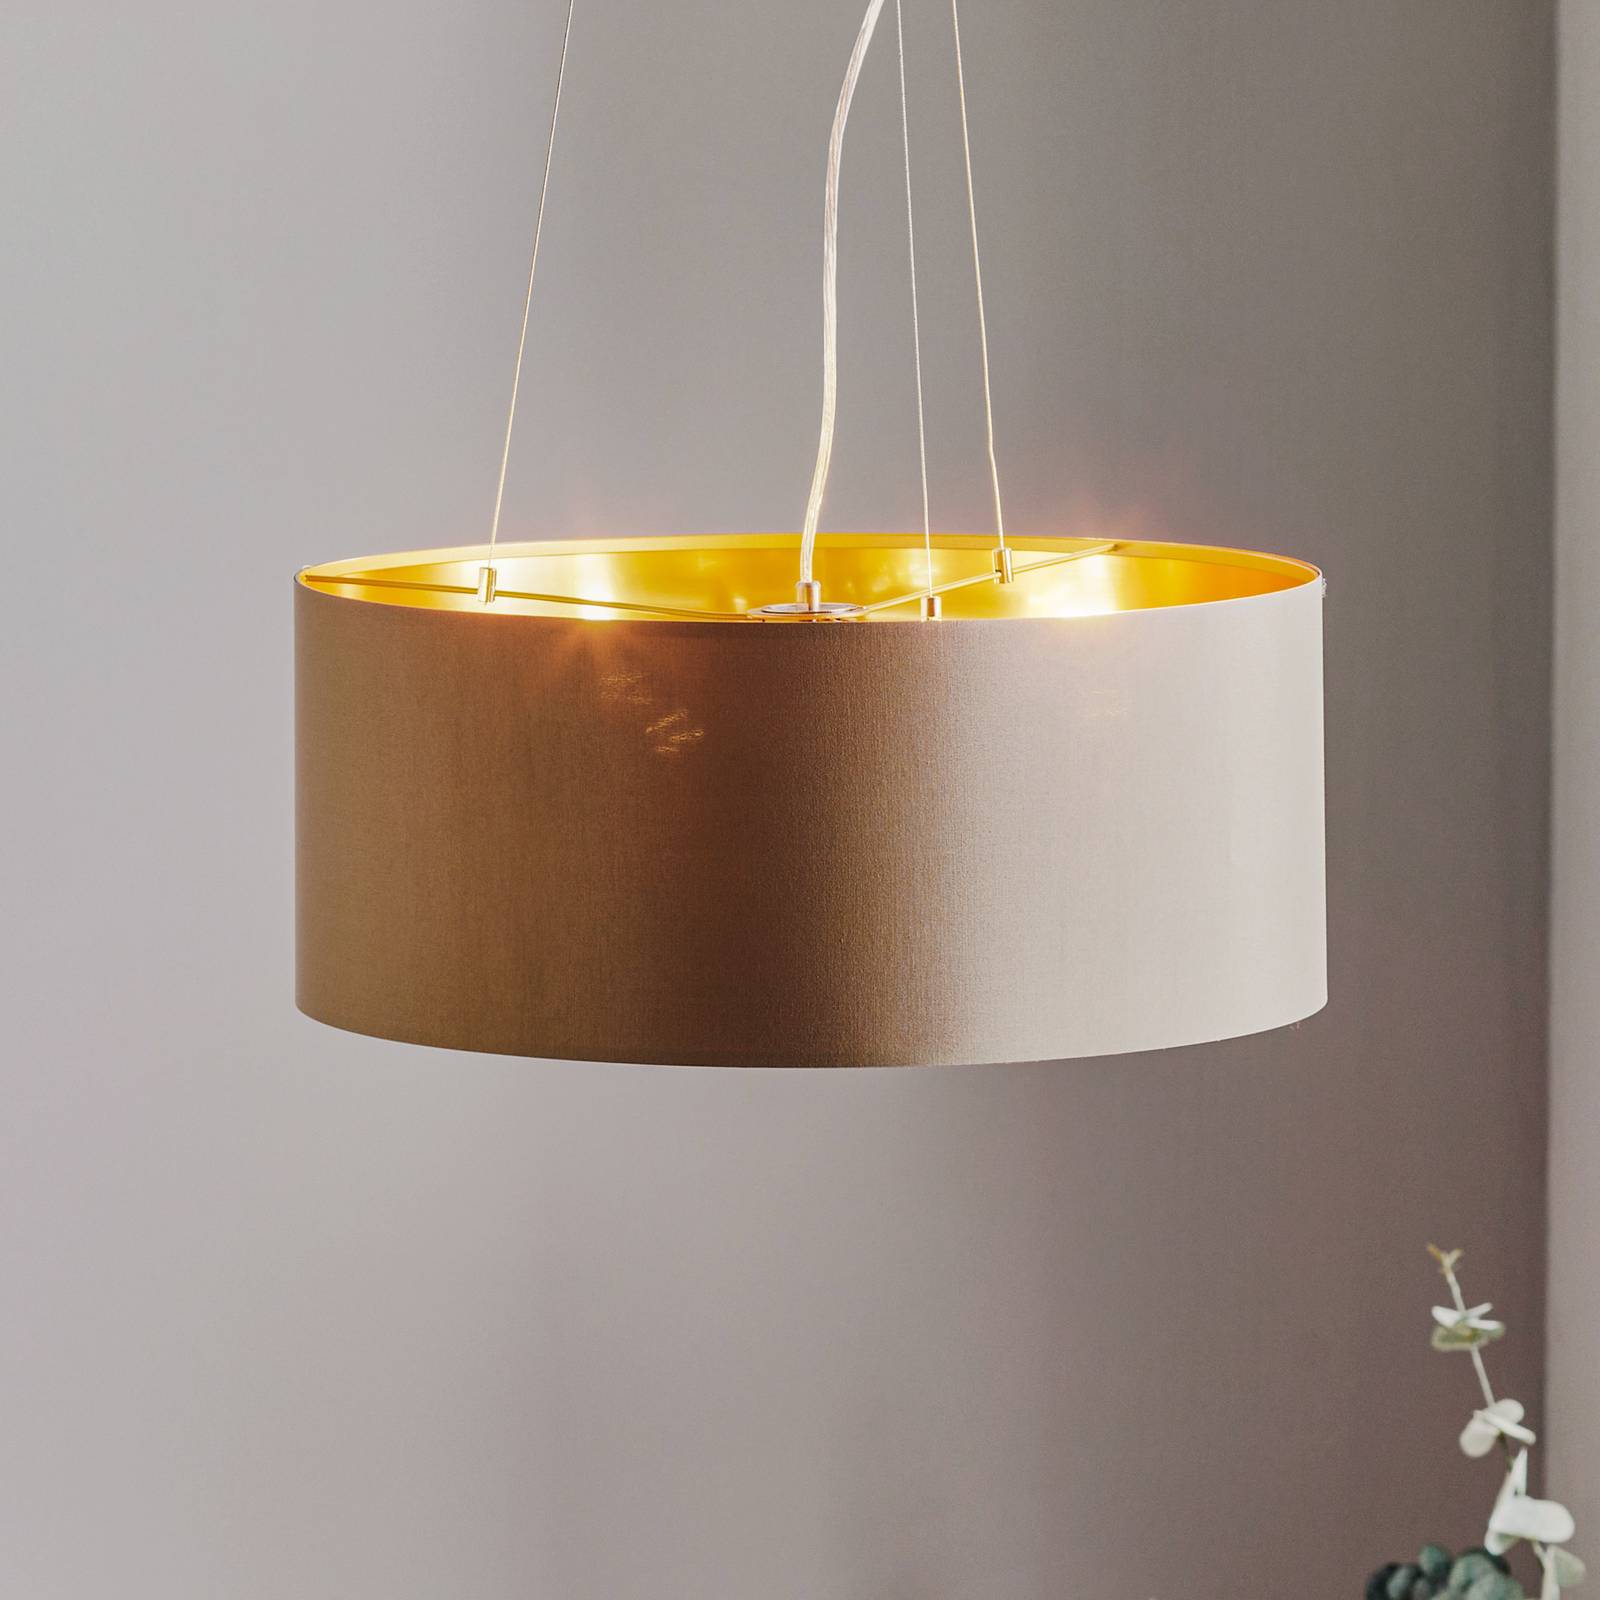 Photos - Chandelier / Lamp EGLO Maserlo pendant light round, taupe and gold 